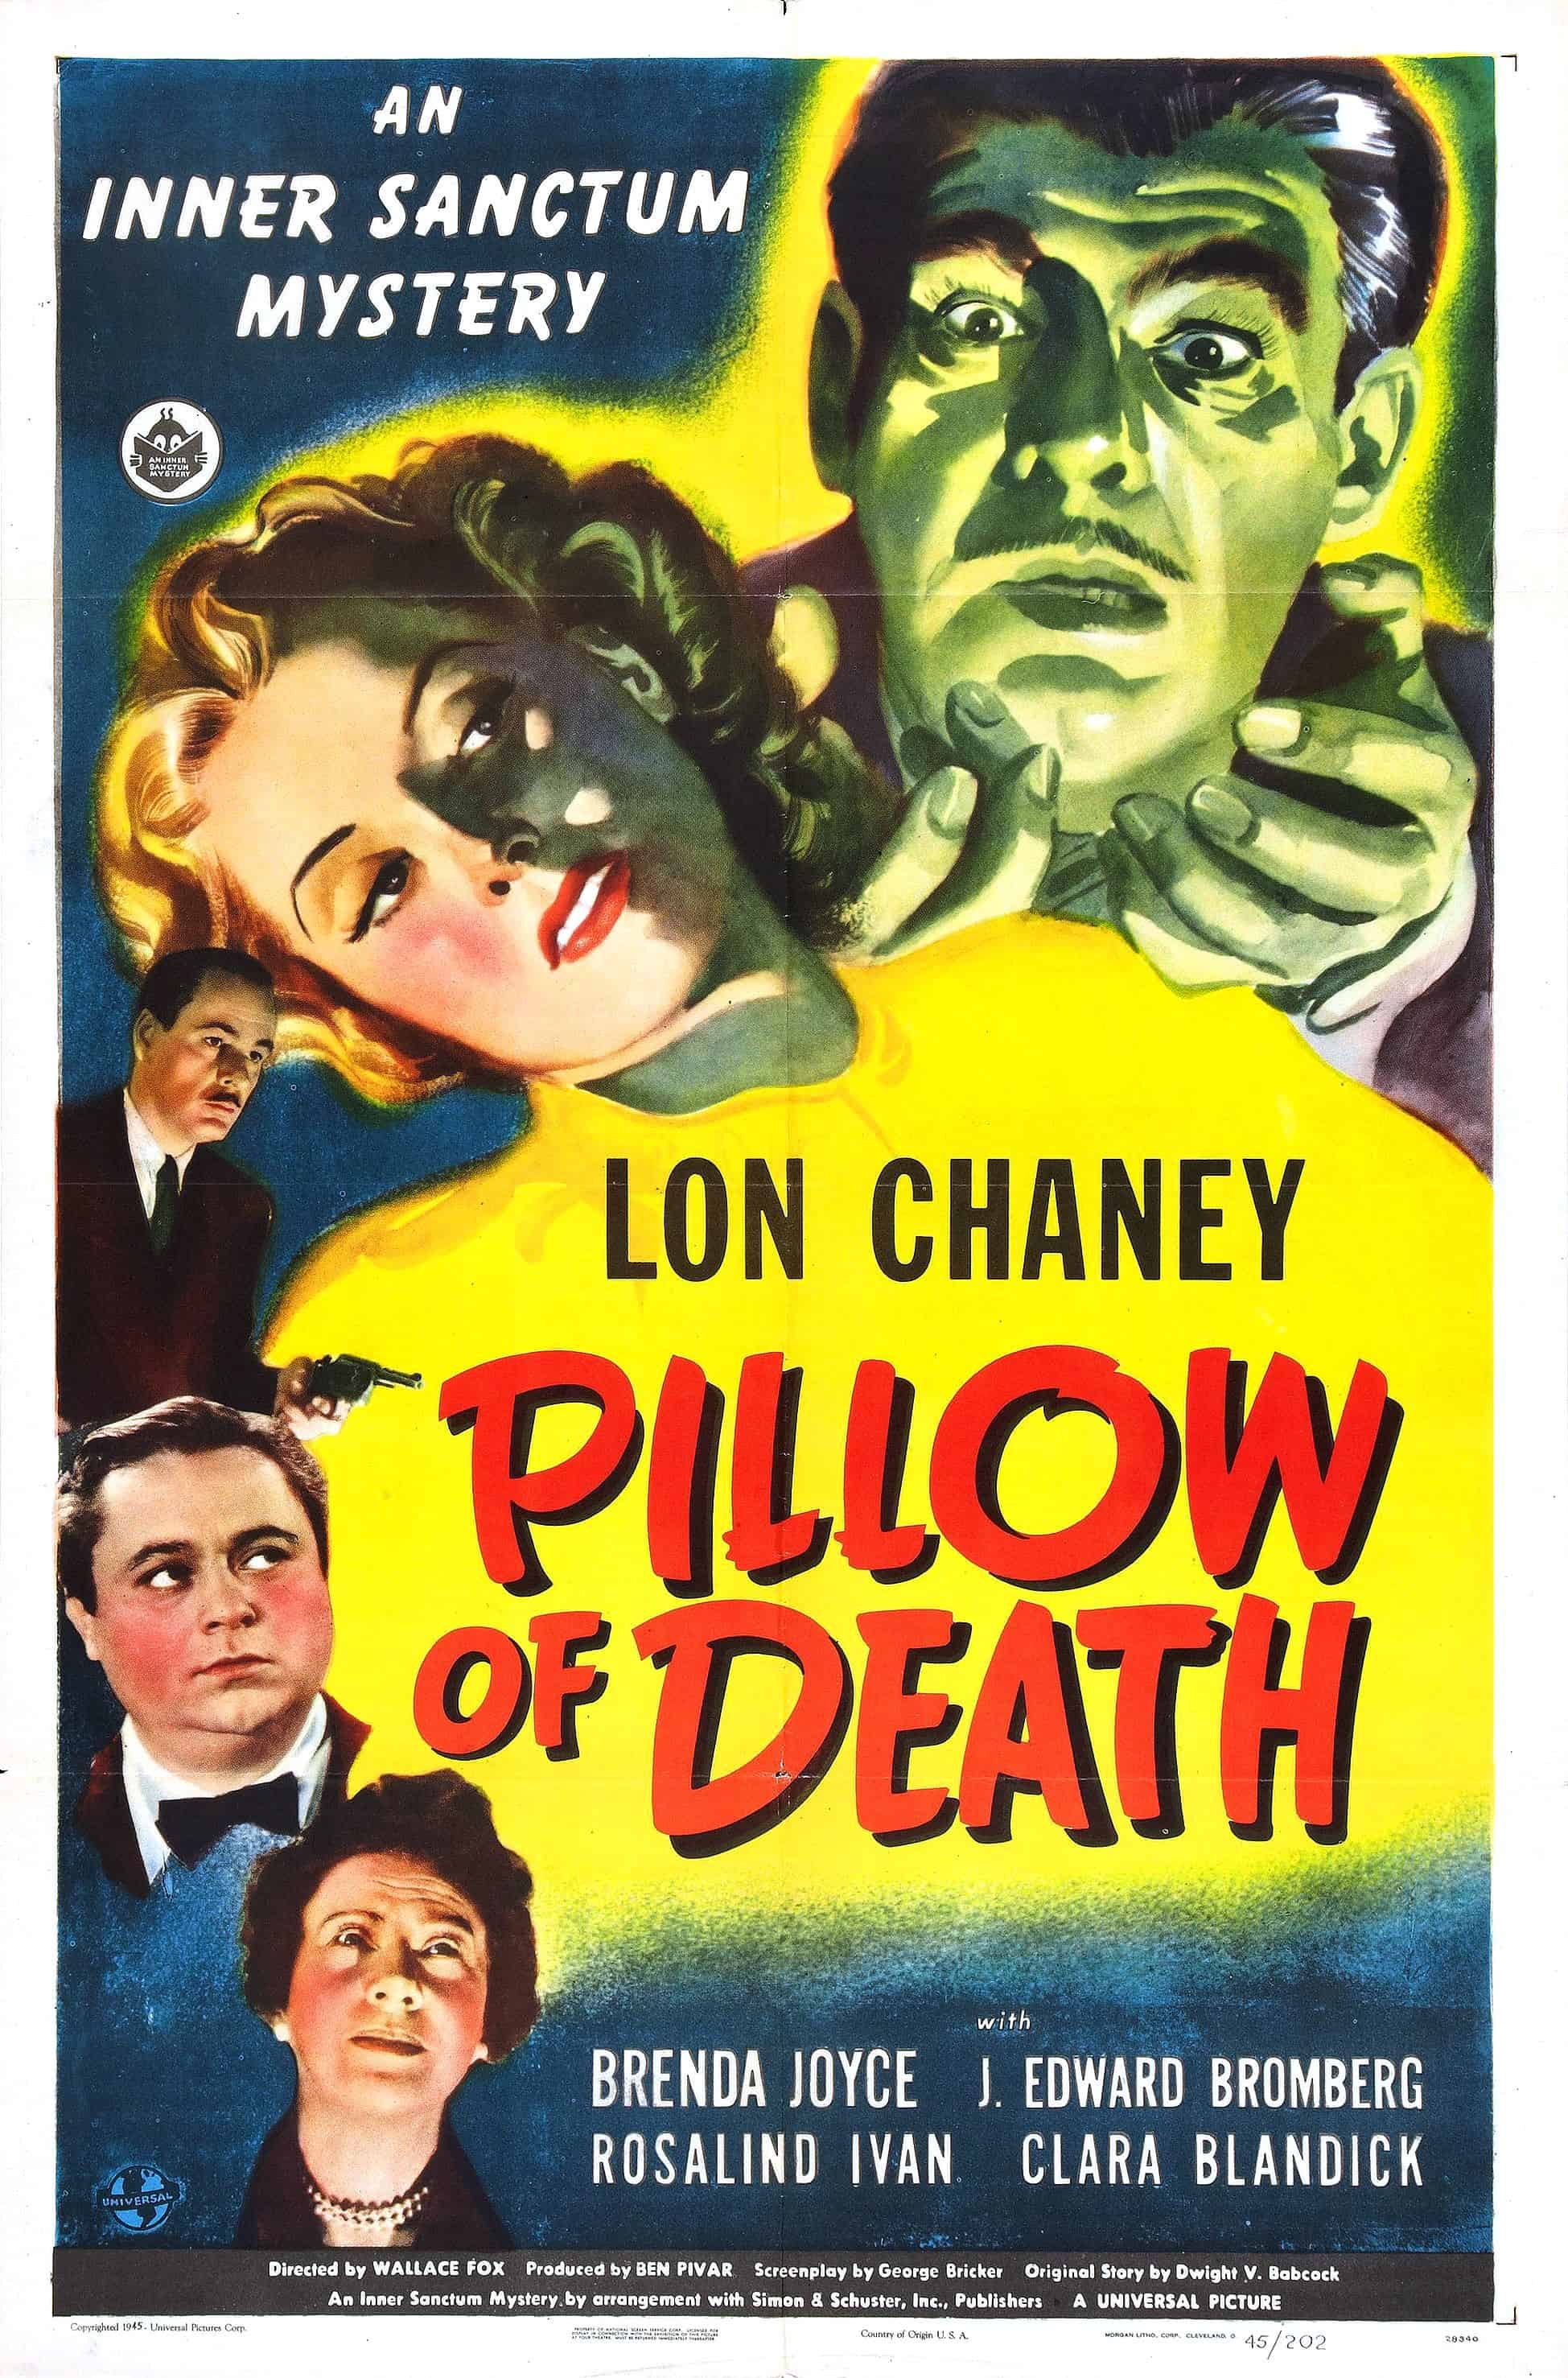 Movie Posters We Love: Pillow of Death